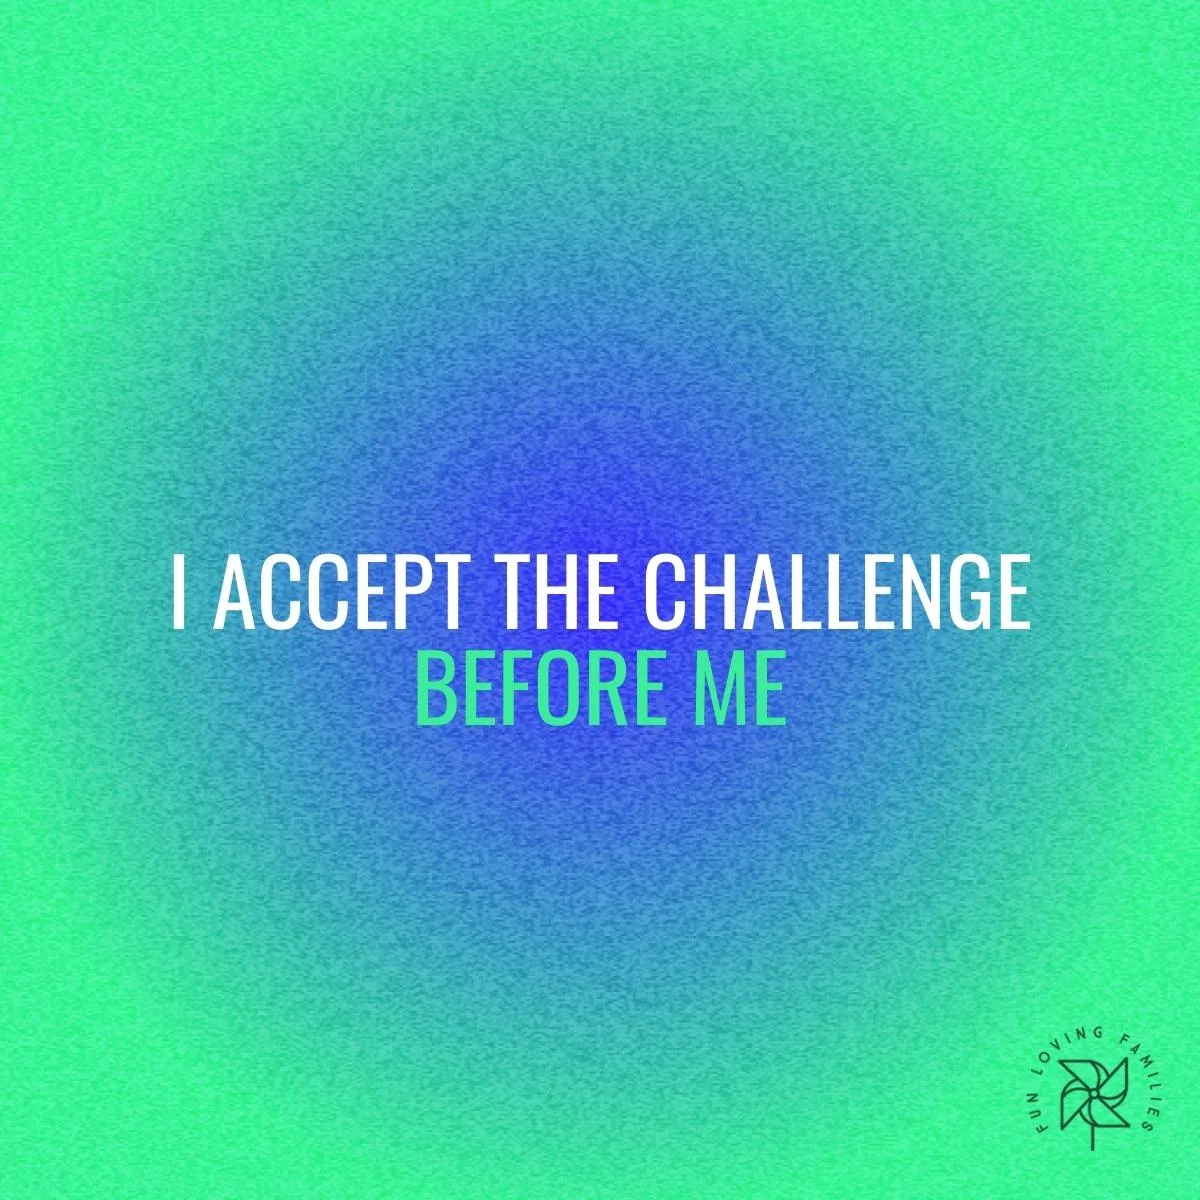 I accept the challenge before me affirmation image